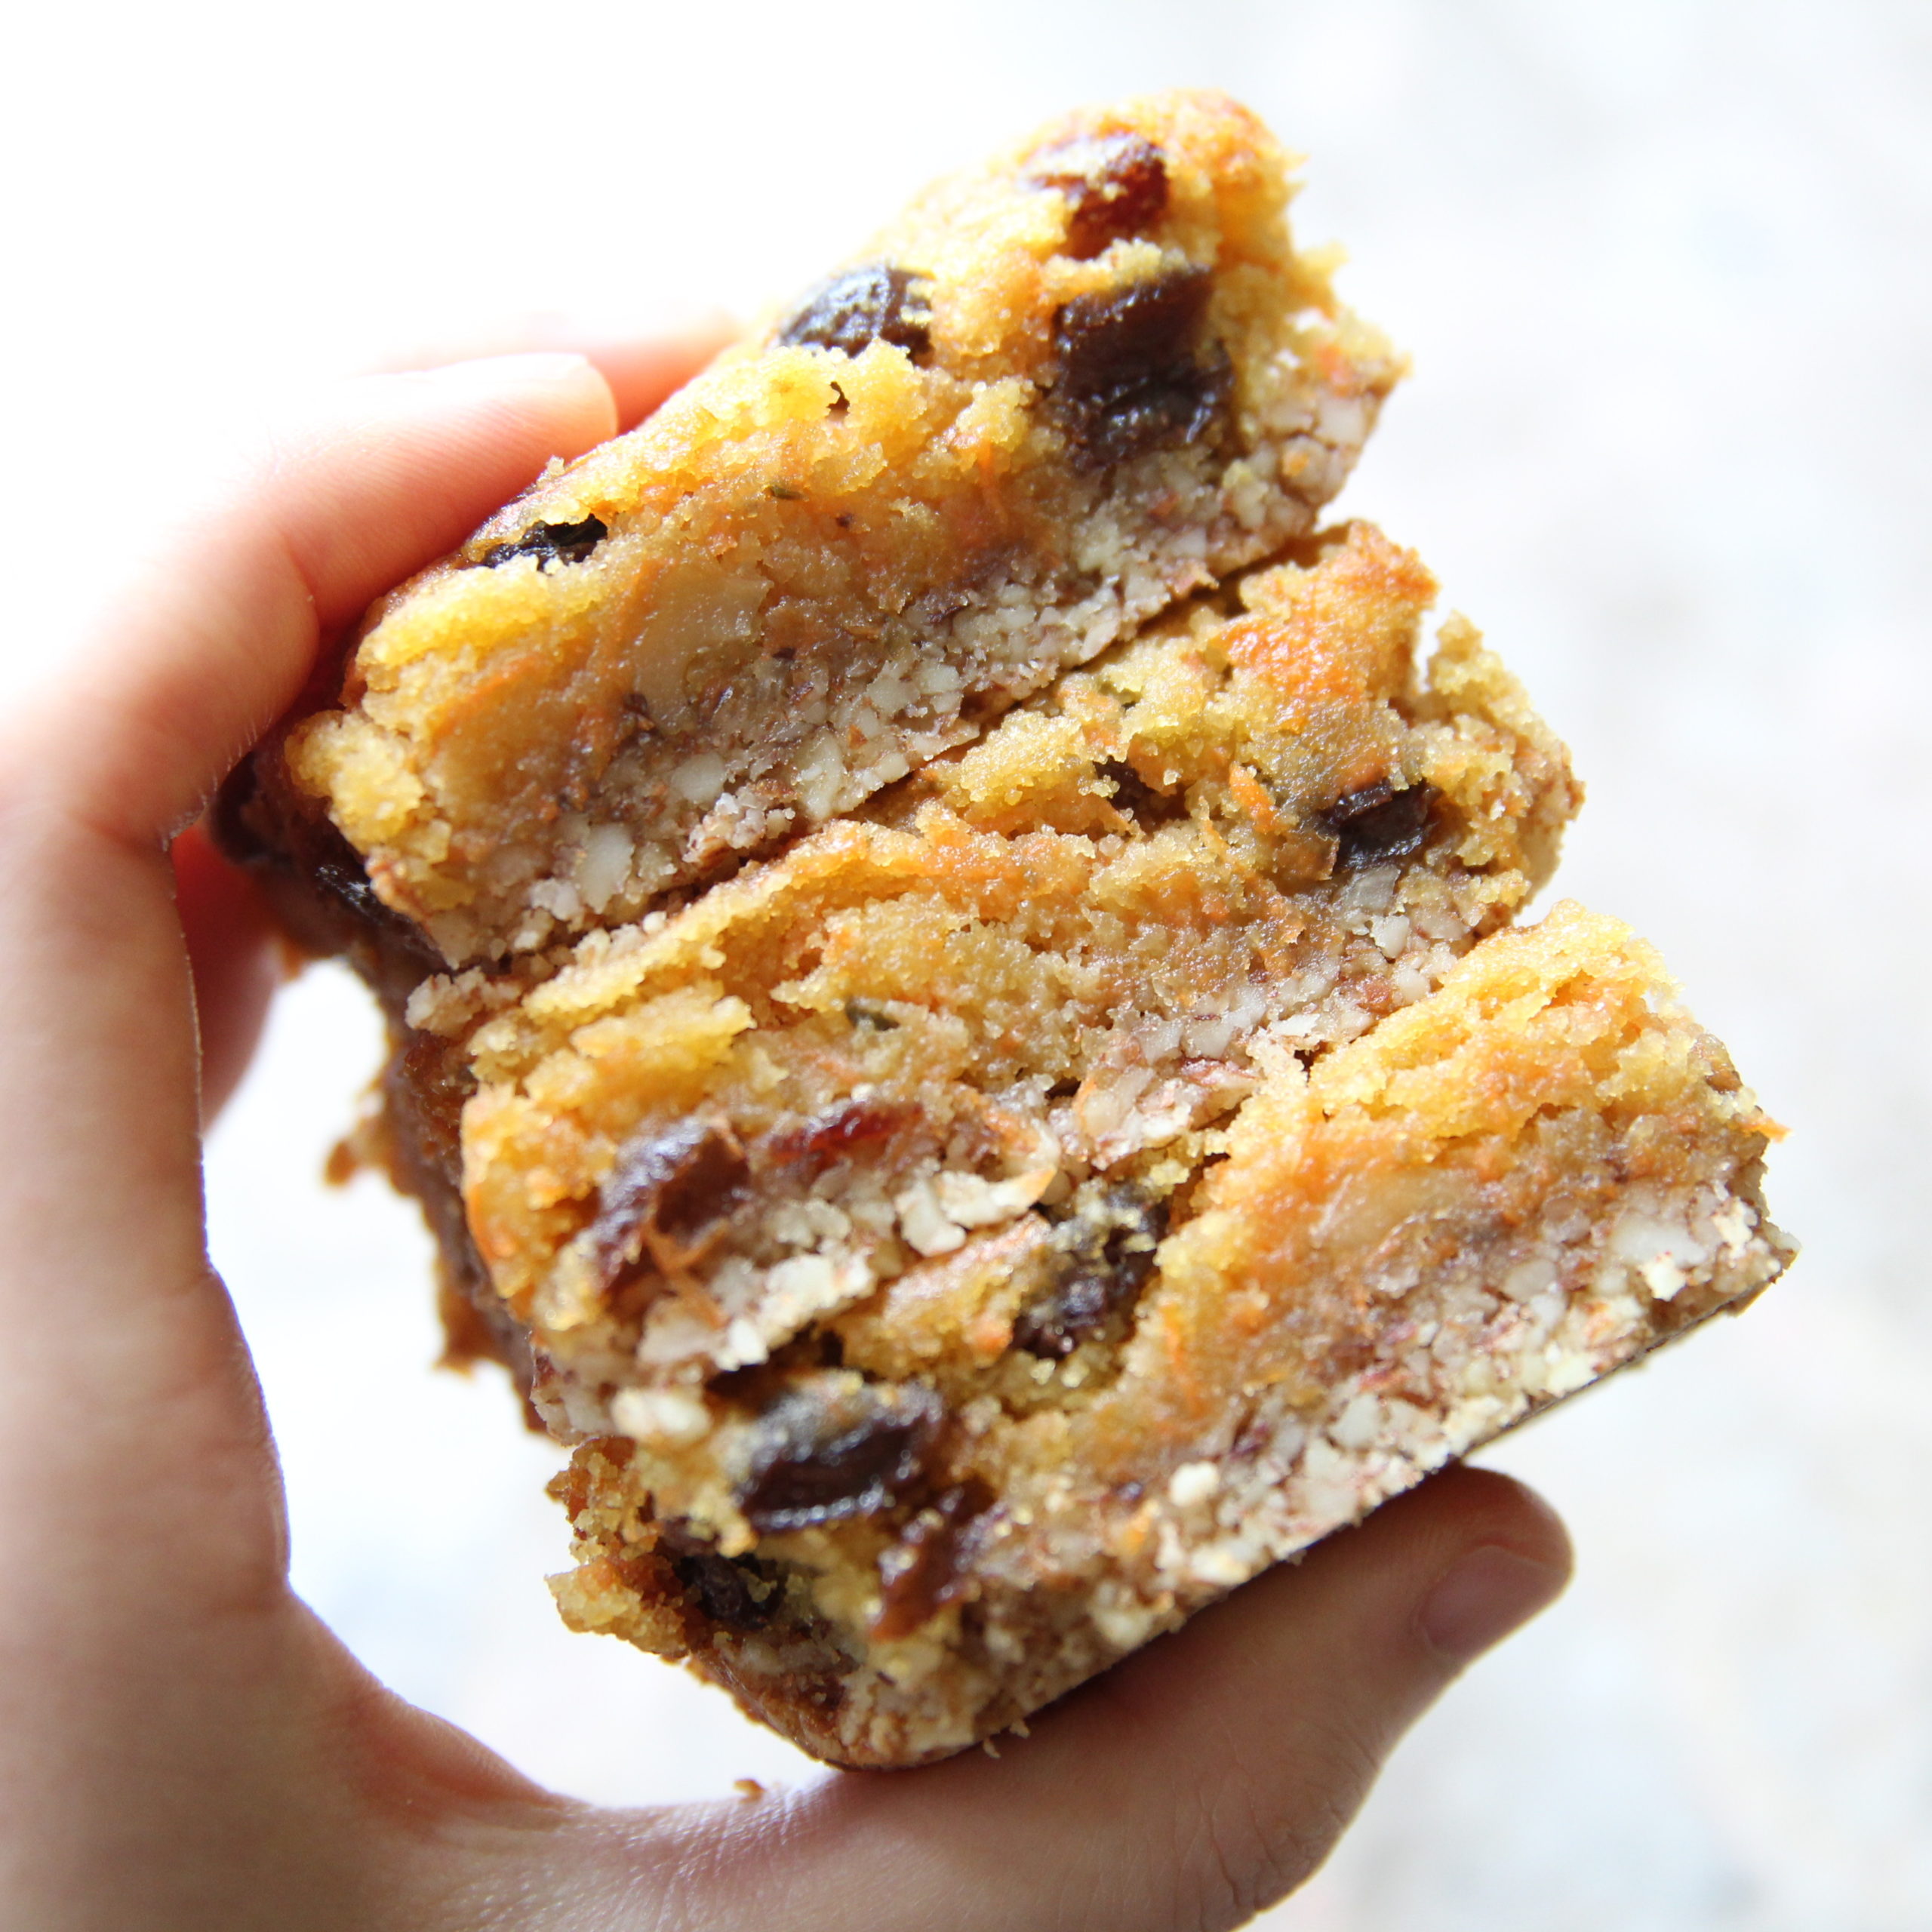 Paleo Carrot Cake Bars with a Chewy Almond Crust (Gluten-Free) - Gluten-Free Oreo Mooncakes